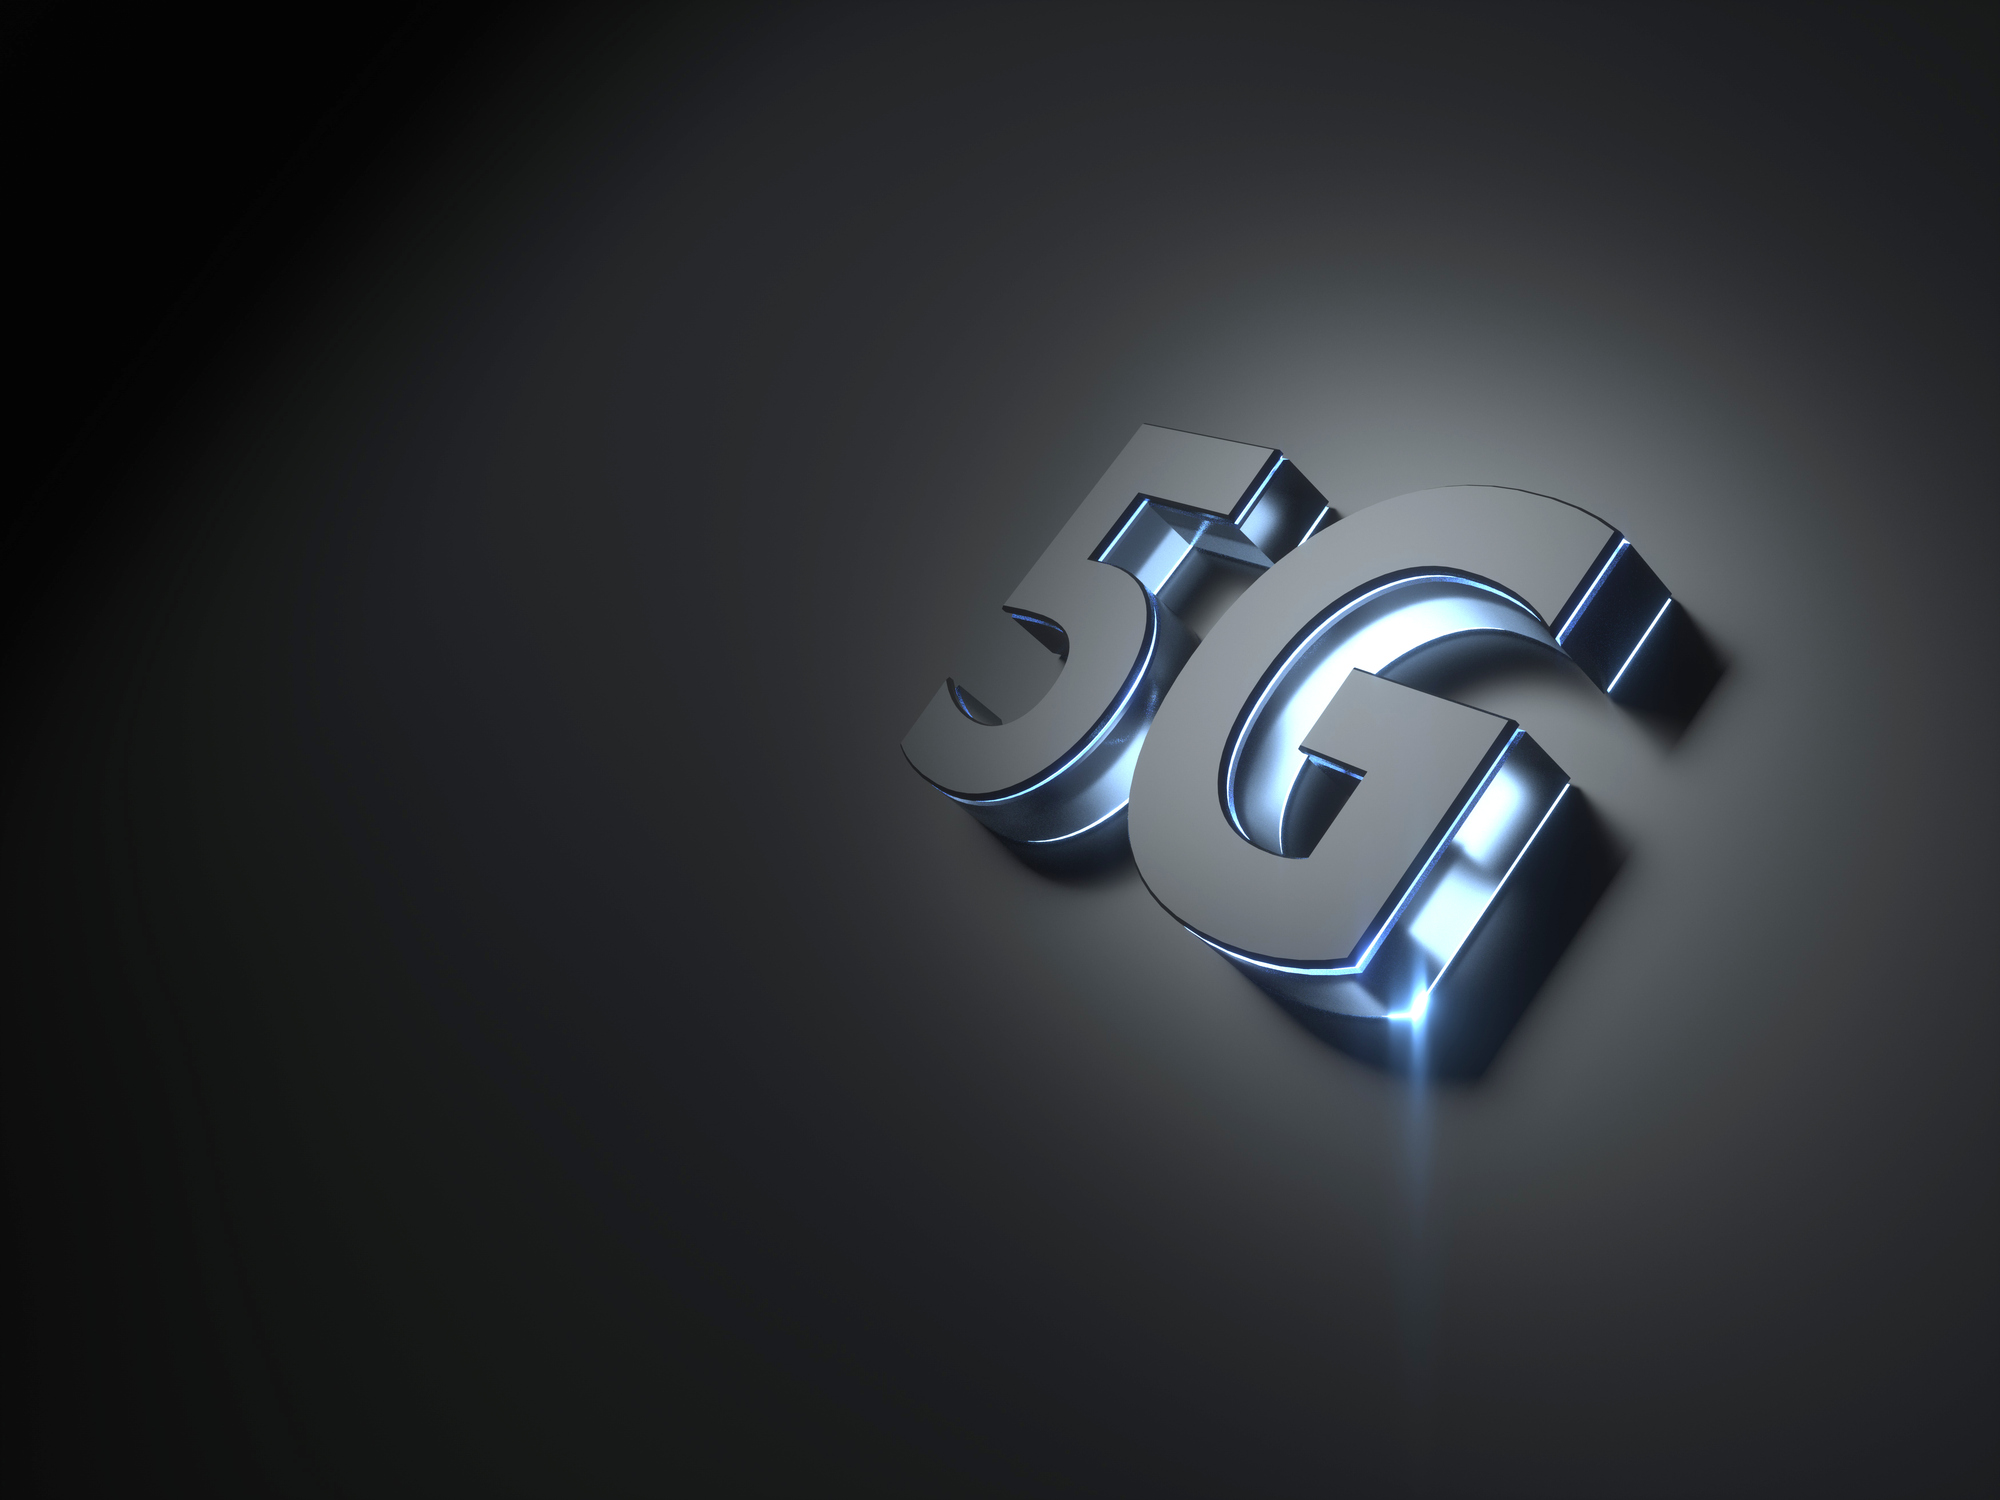 How Technology Will Benefit from Rogers Communications Bringing Standalone 5G to Canada